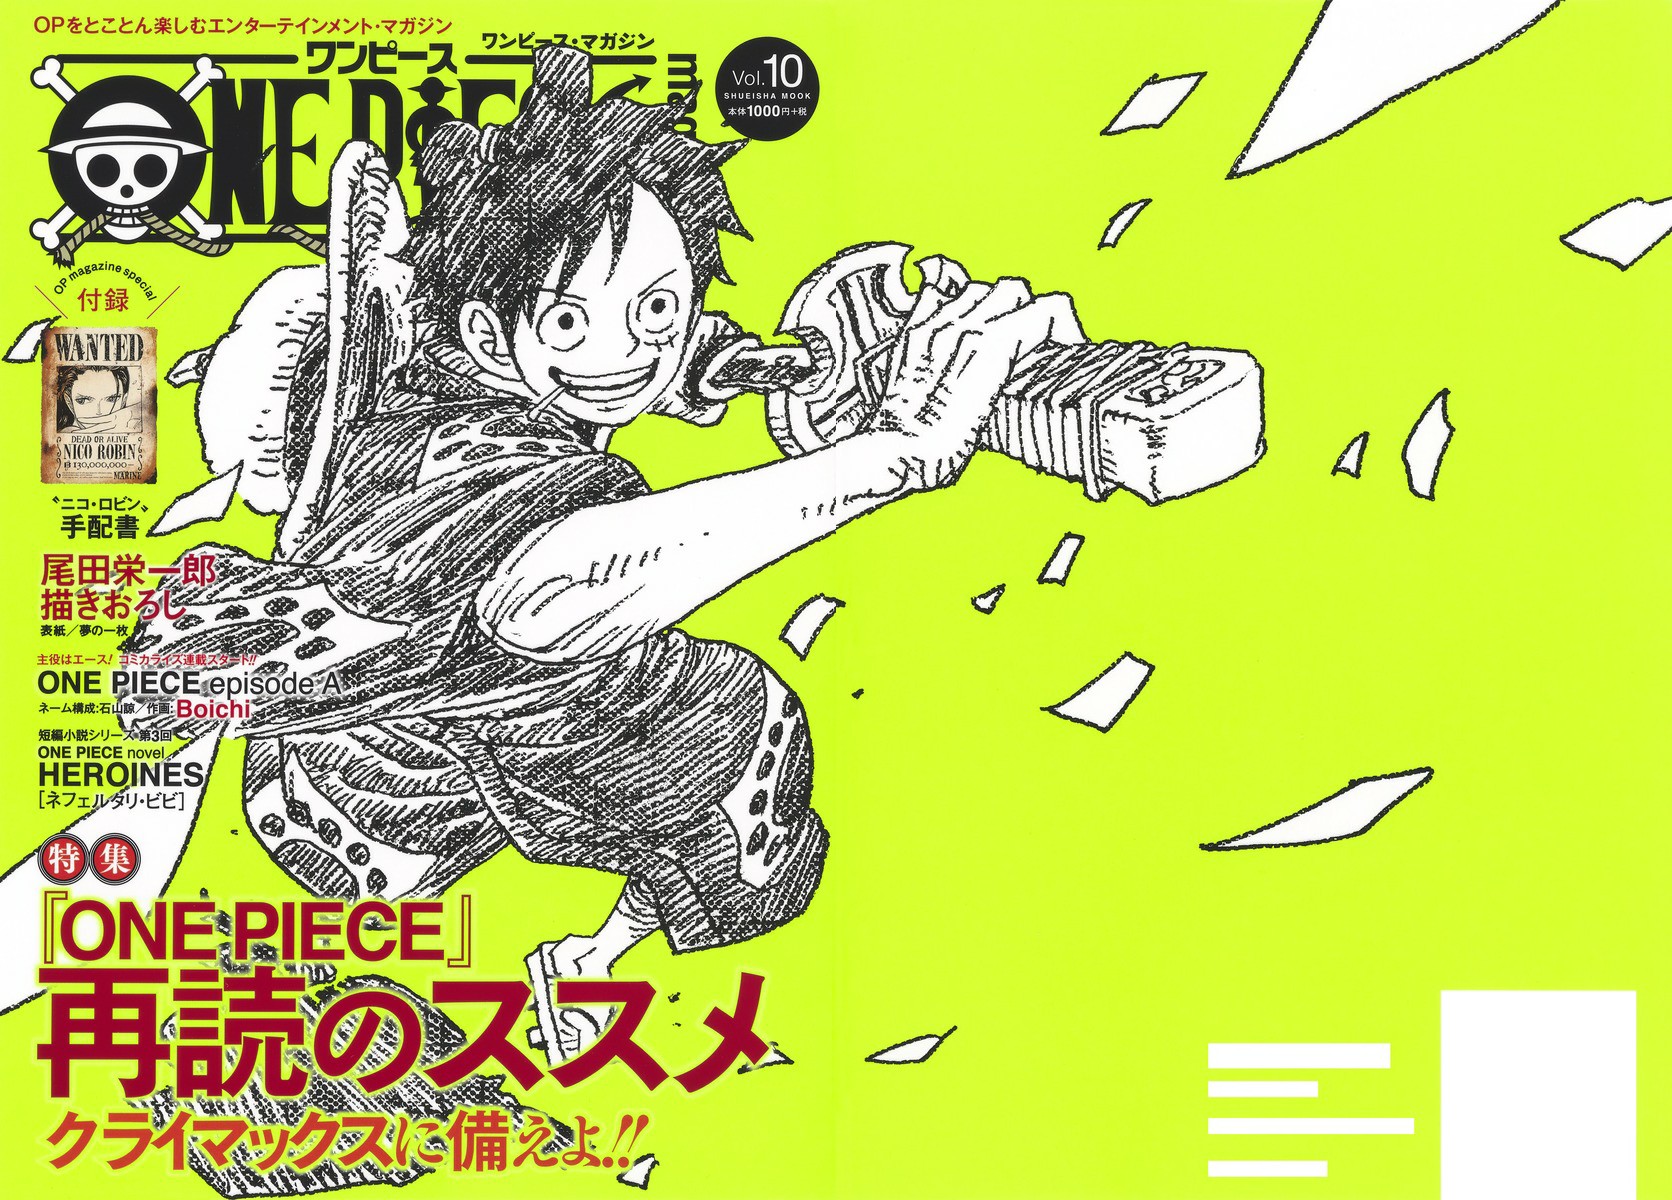 Special One Piece Magazine And Novels Mangahelpers